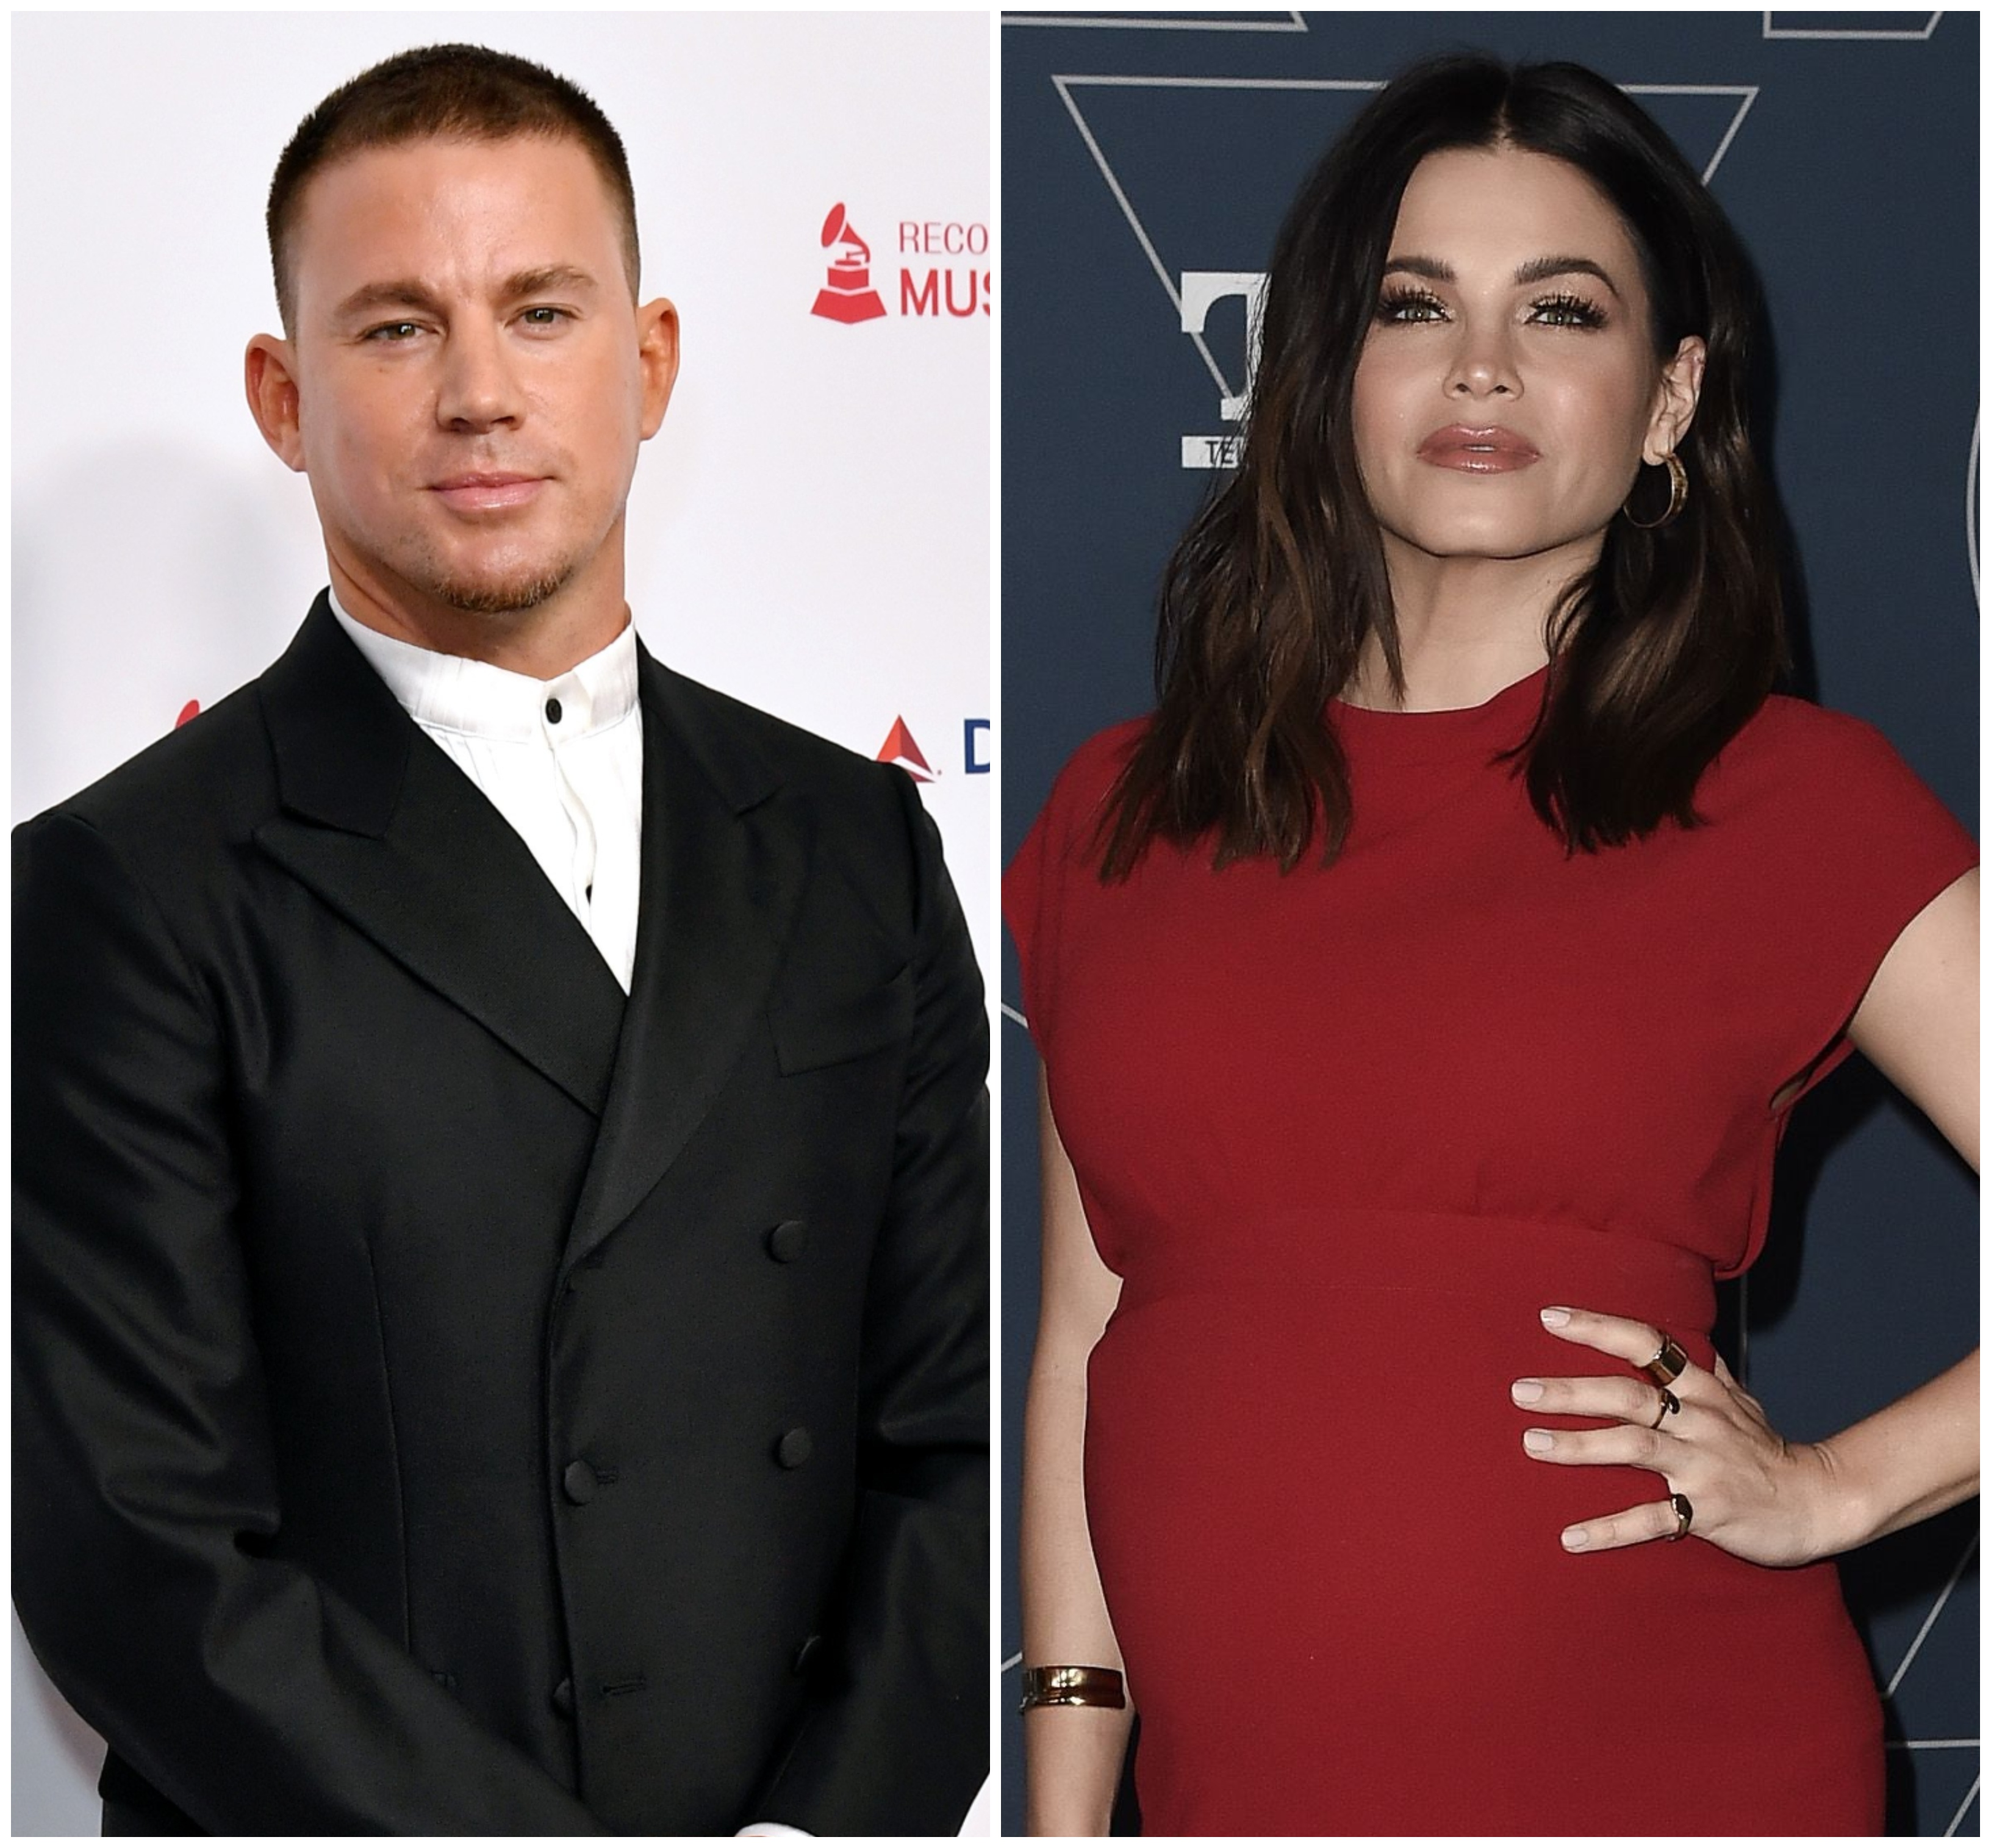 Channing Tatum and Jenna Dewan's Divorce Is Finalized | In Touch Weekly